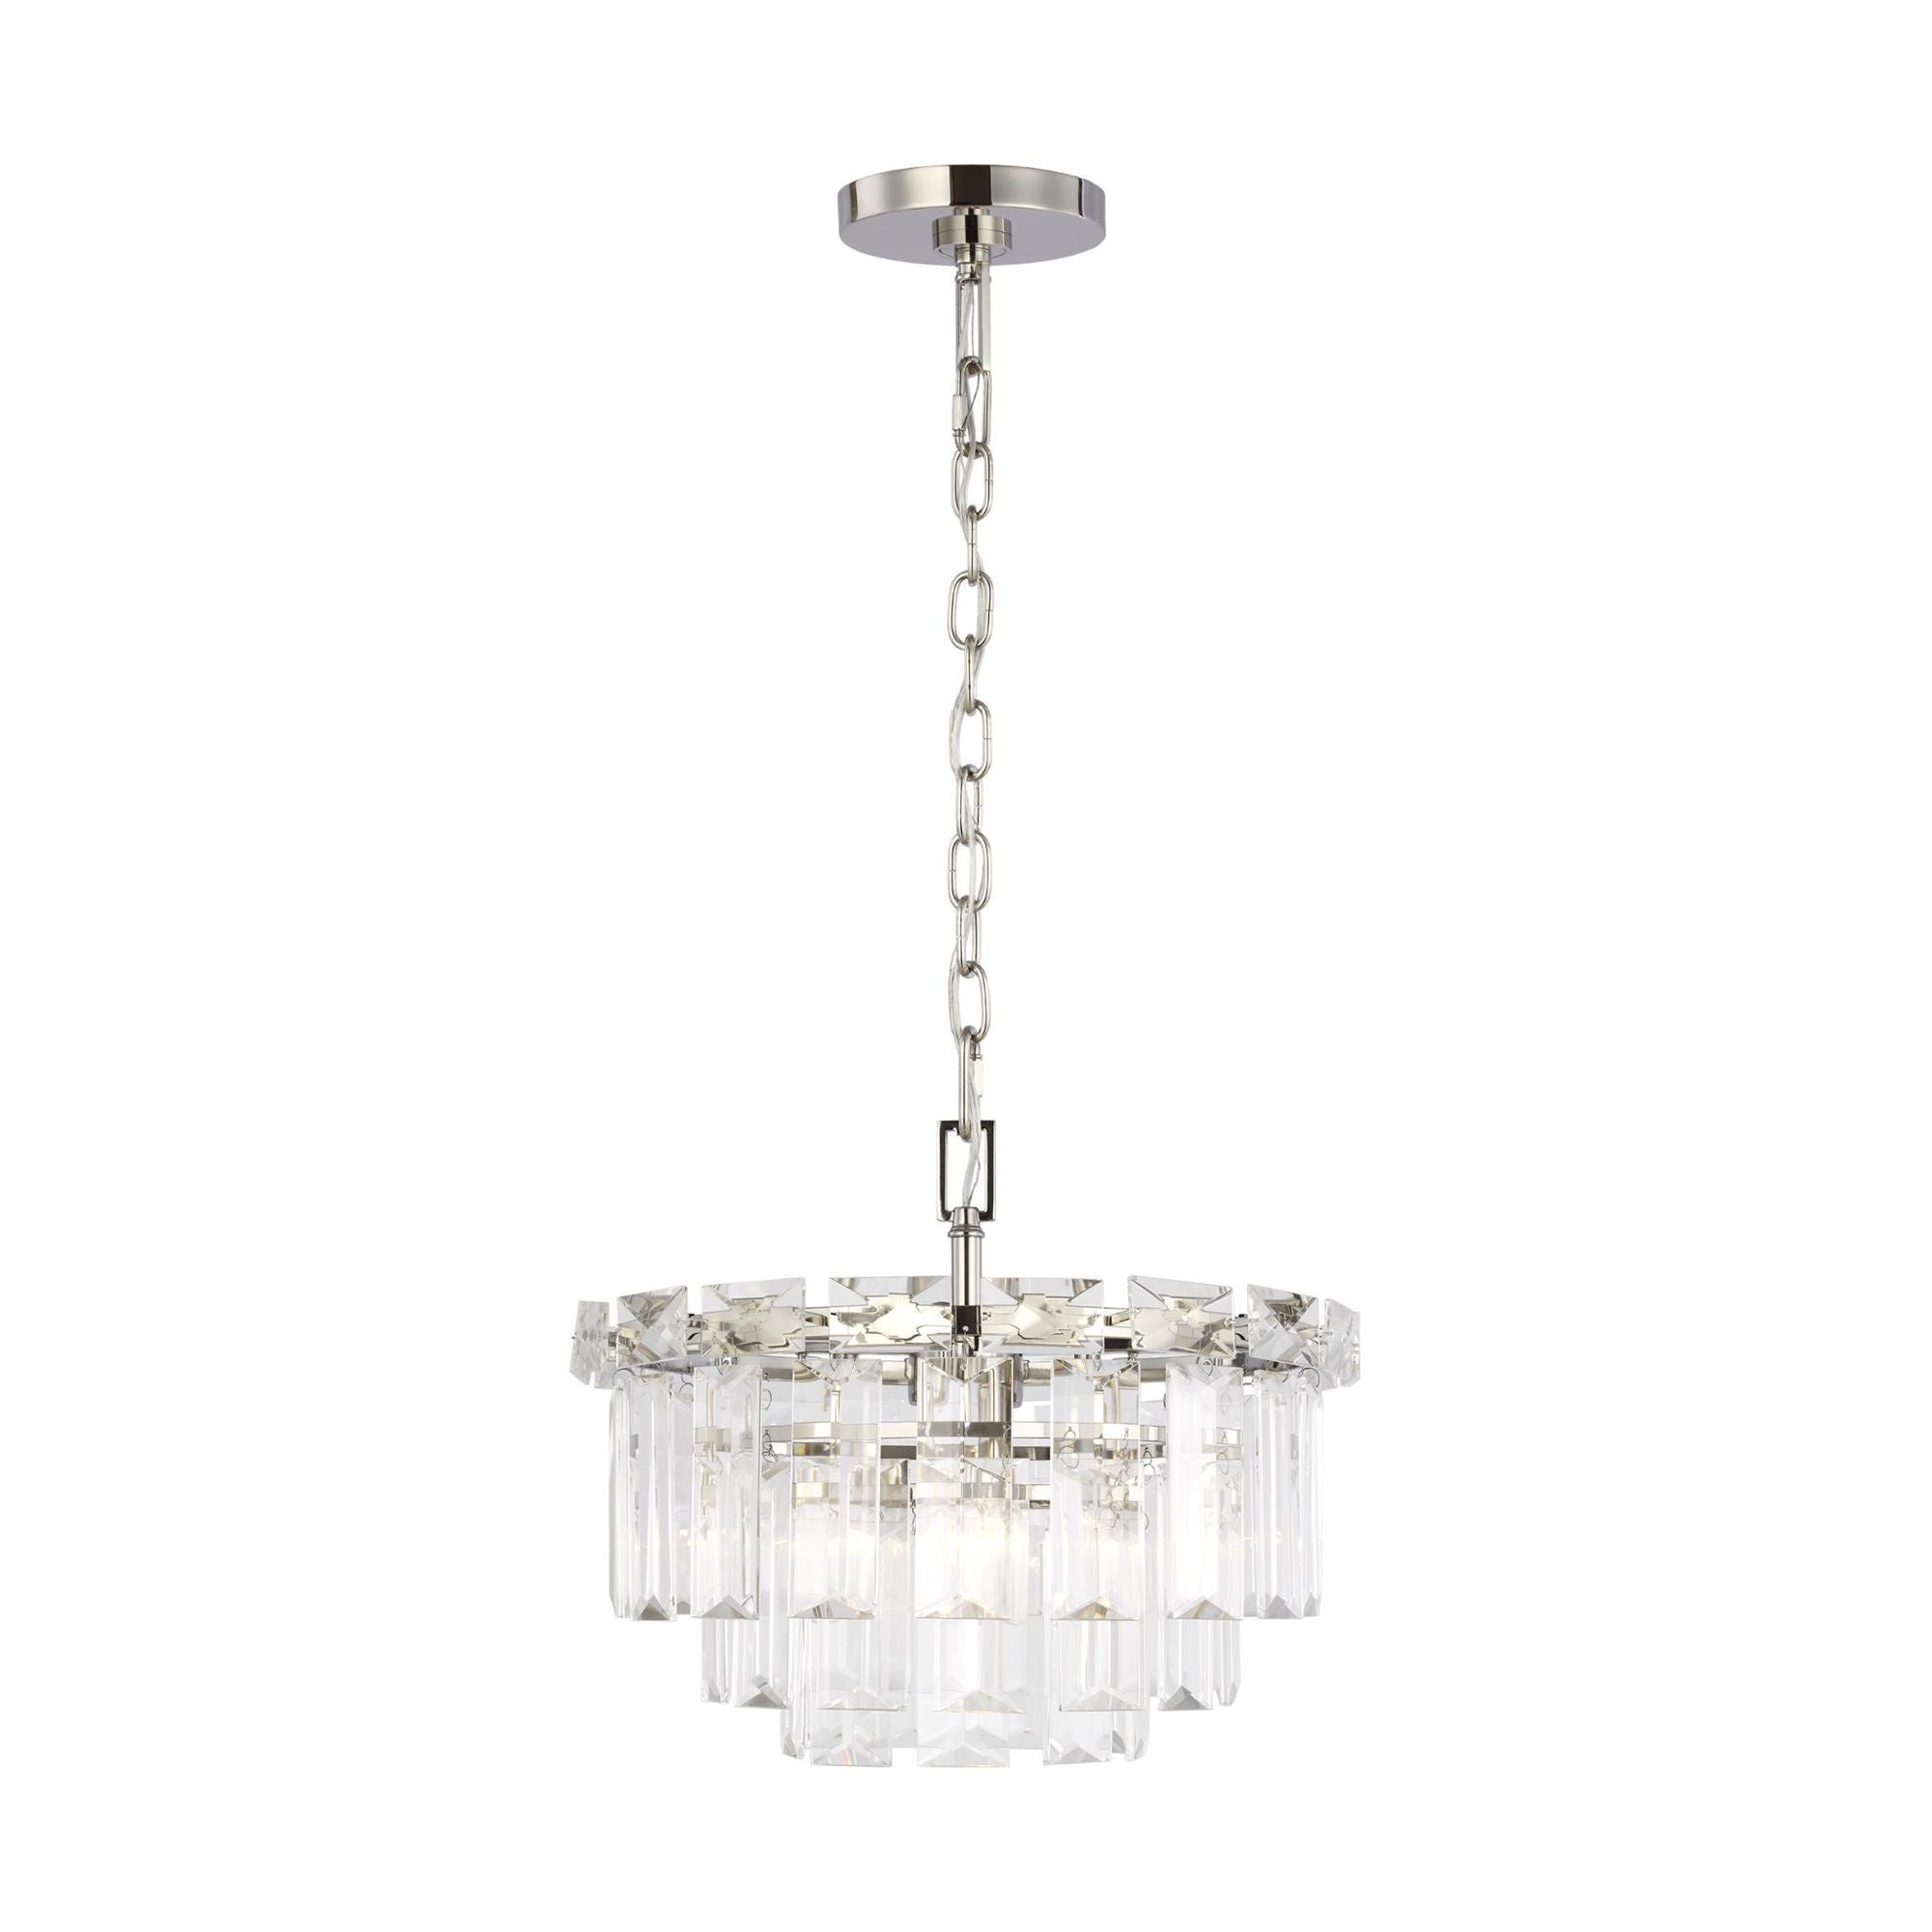 Chapman & Myers Arden Small Chandelier in Polished Nickel